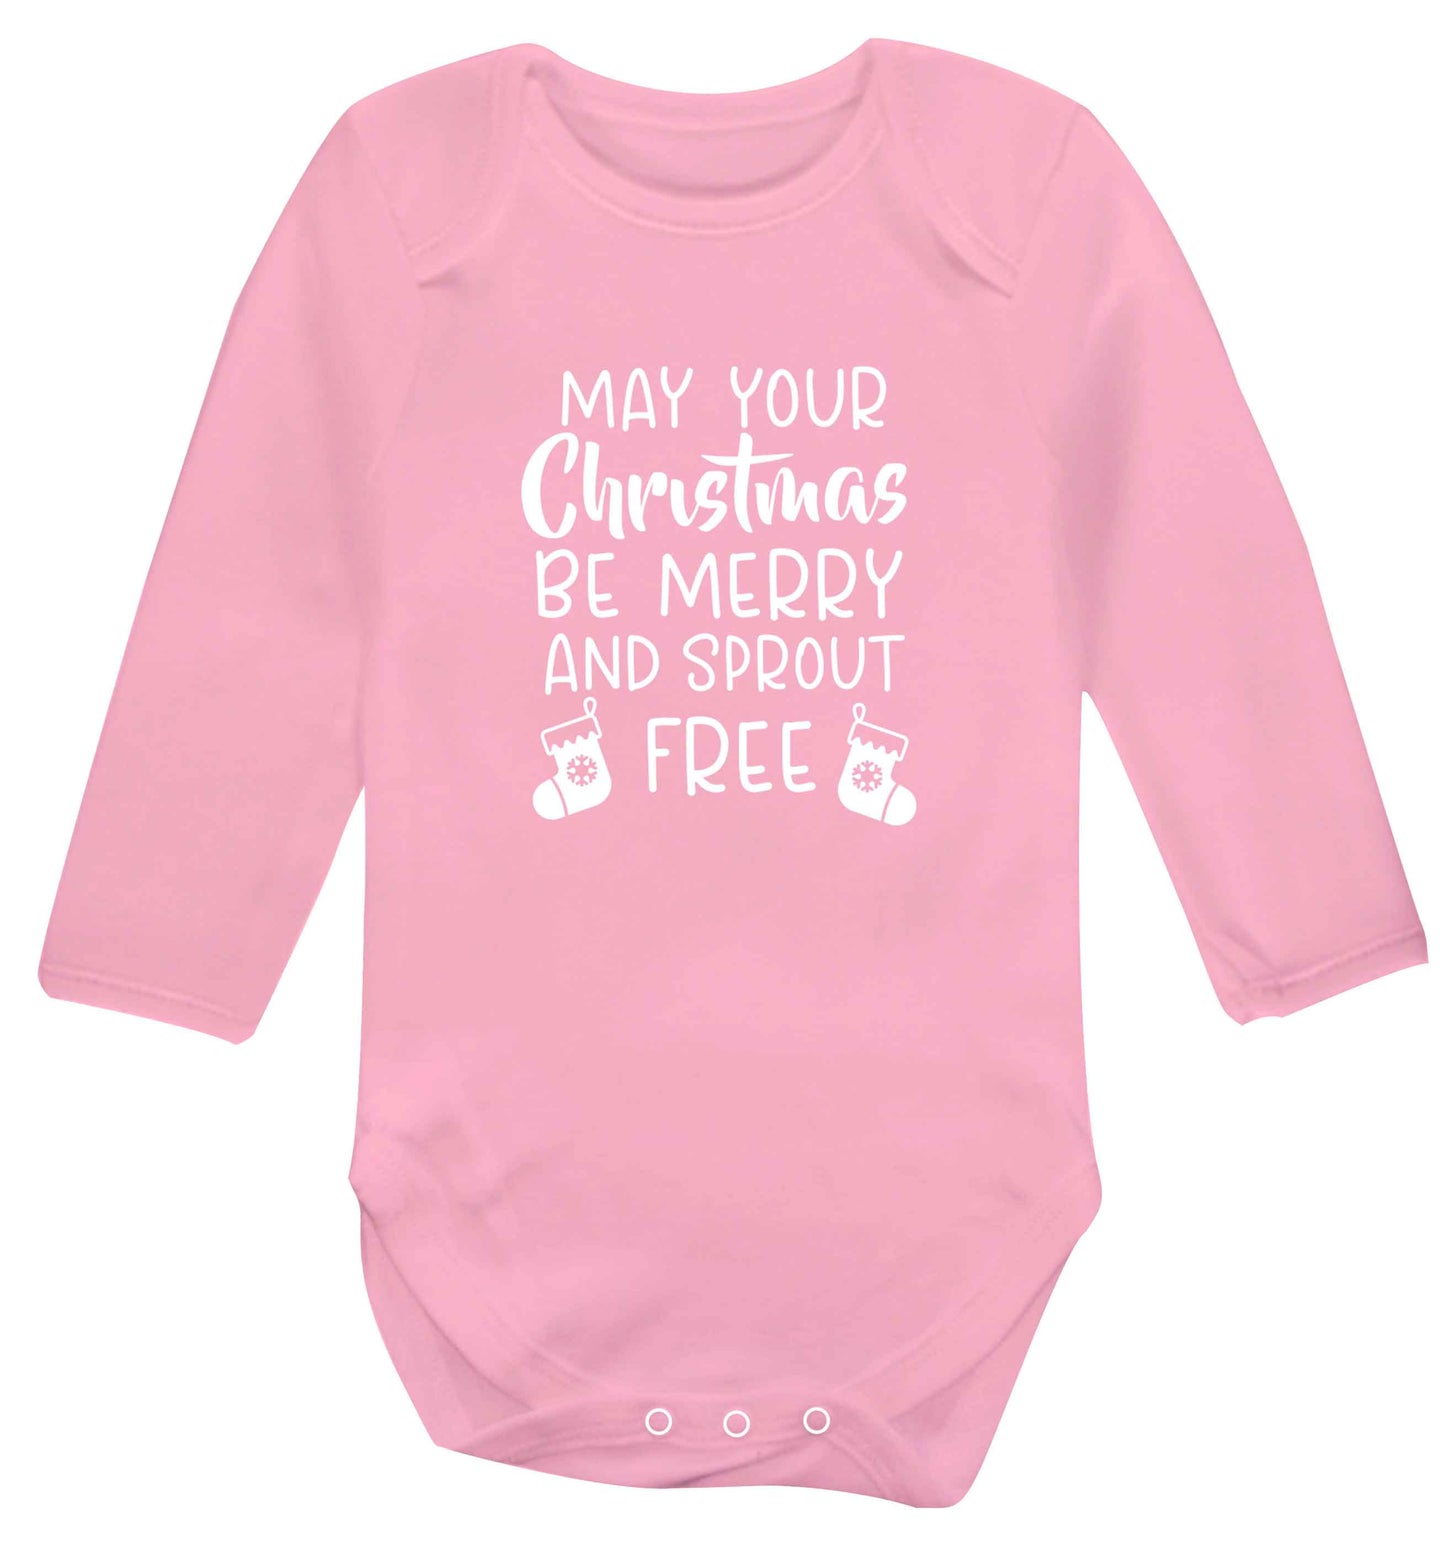 May your Christmas be merry and sprout free baby vest long sleeved pale pink 6-12 months